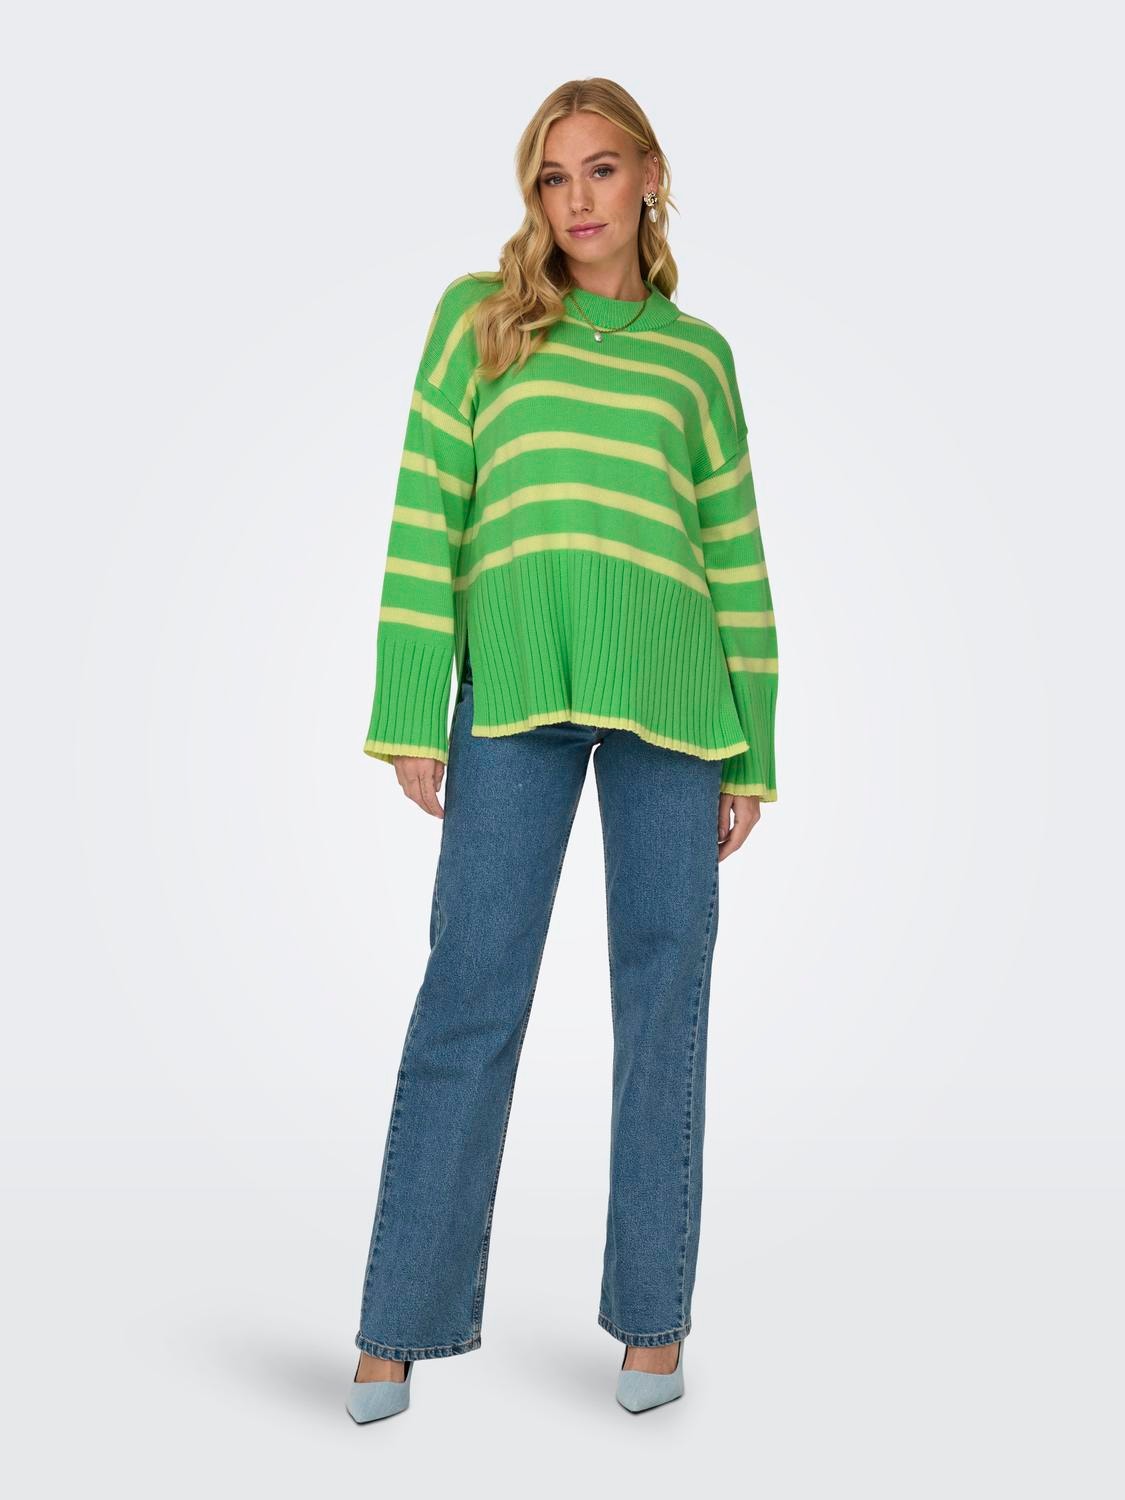 ONLY Loose fit o-neck knit pullover -Spring Bouquet - 15310564